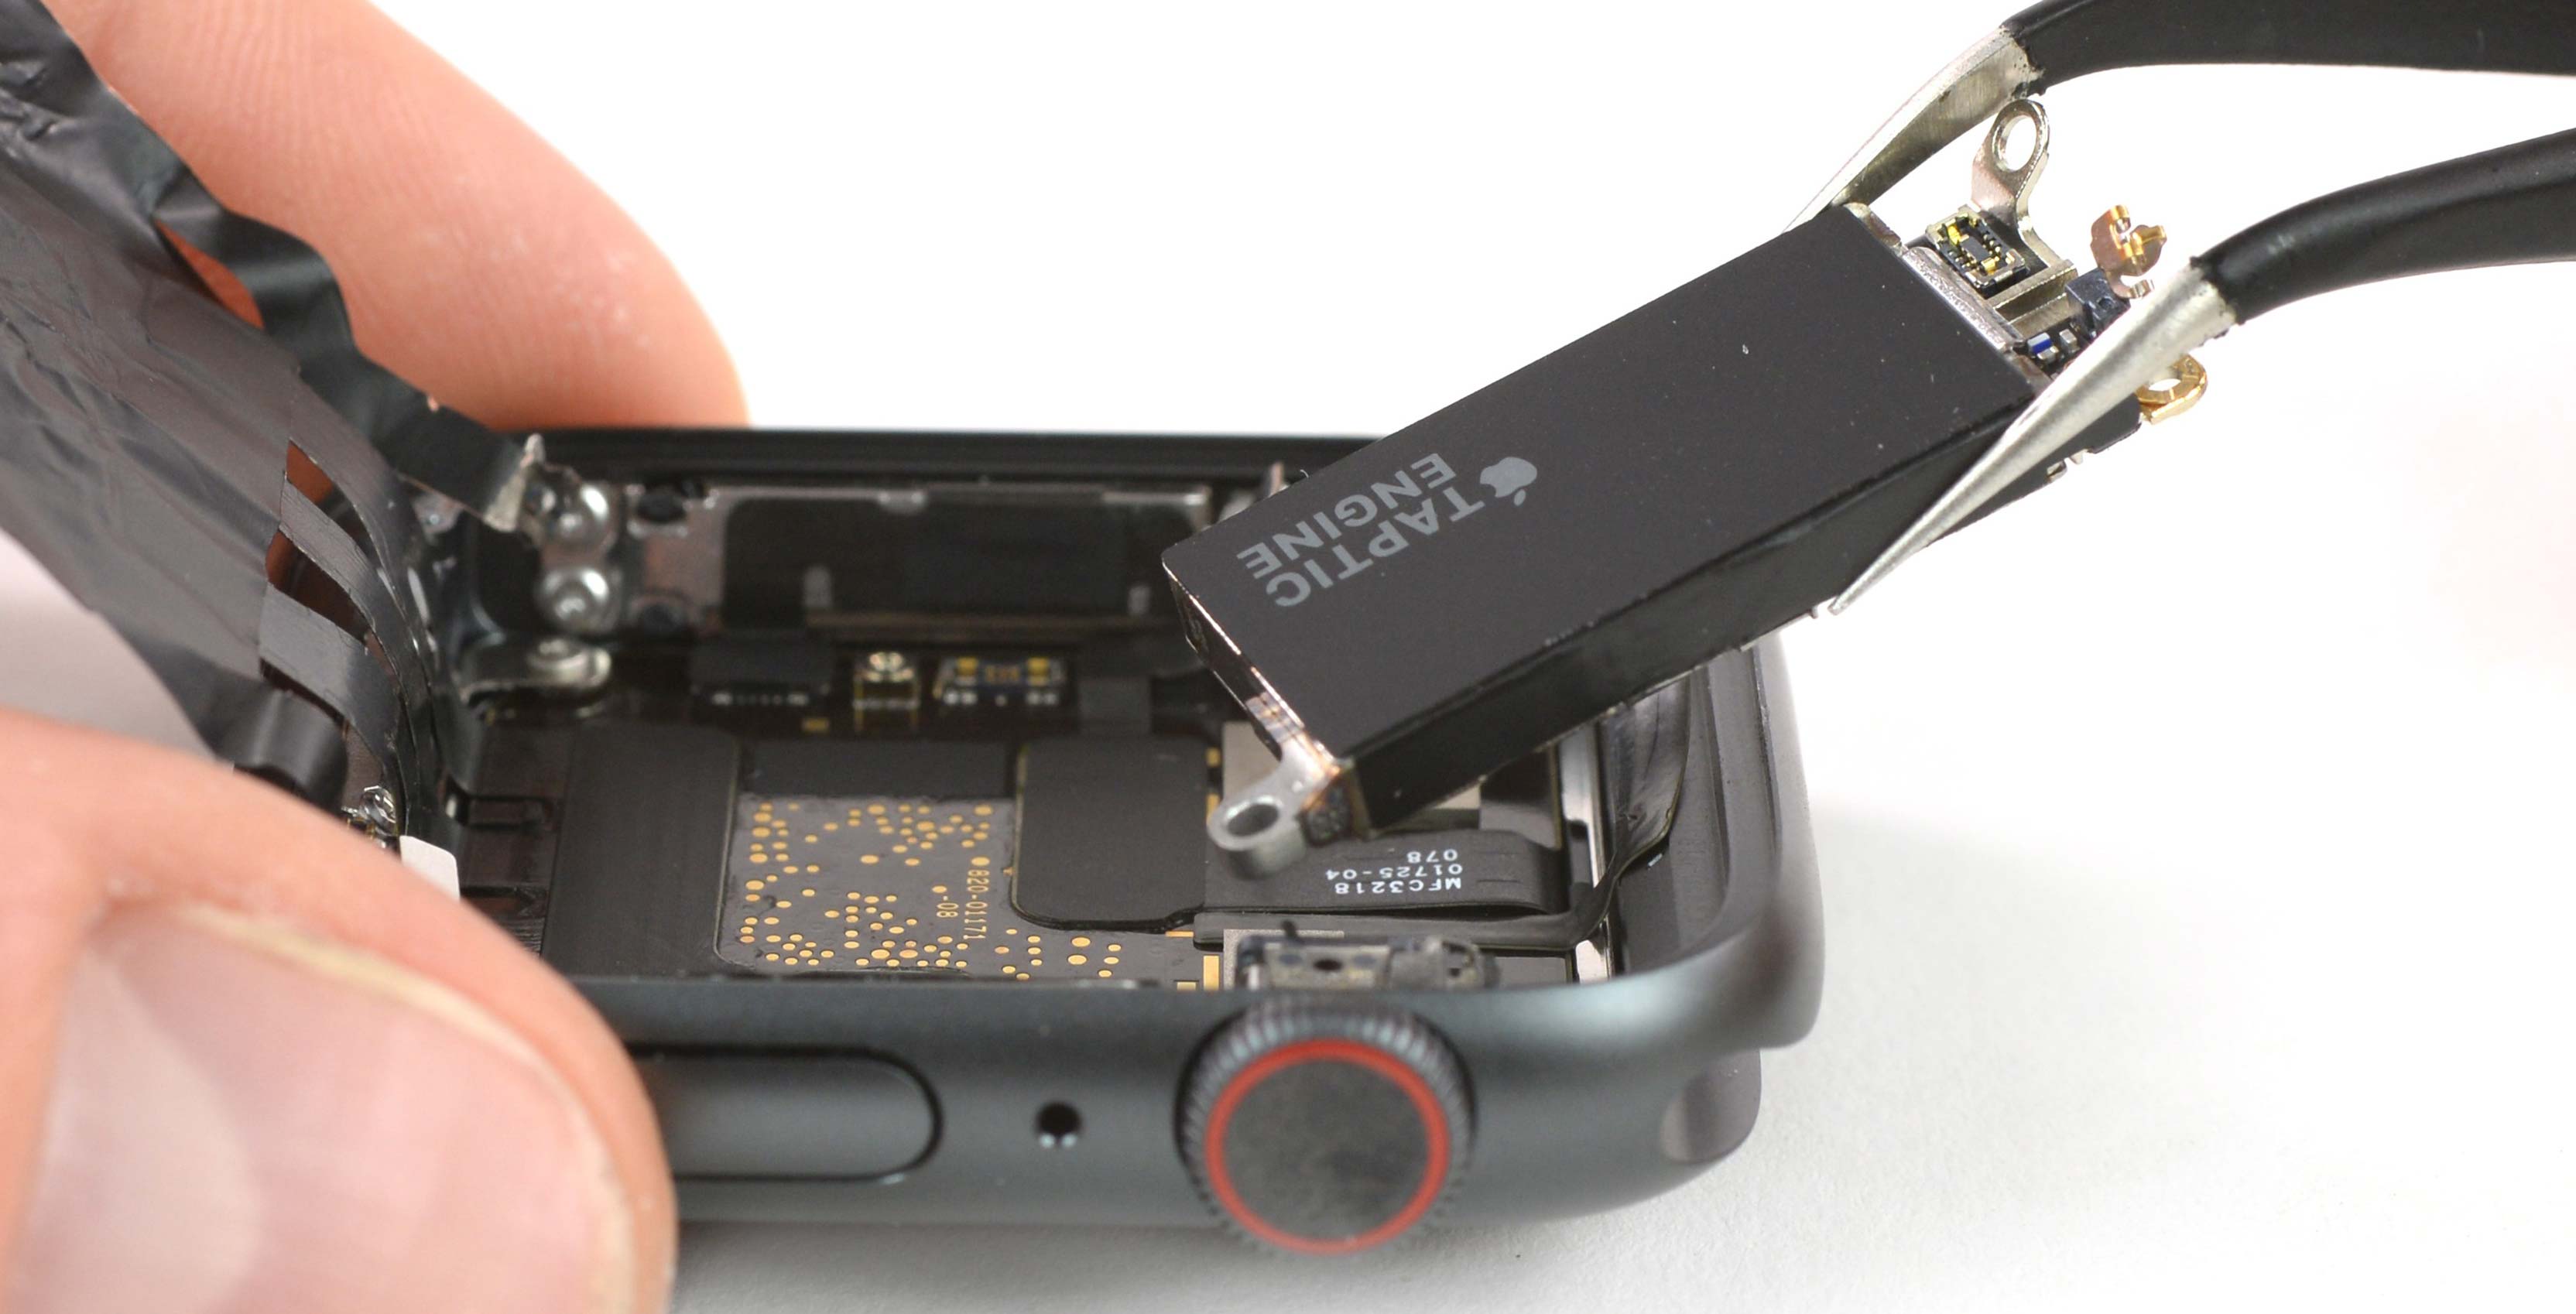 iFixit conducted a teardown of the new Apple Watch Series 4